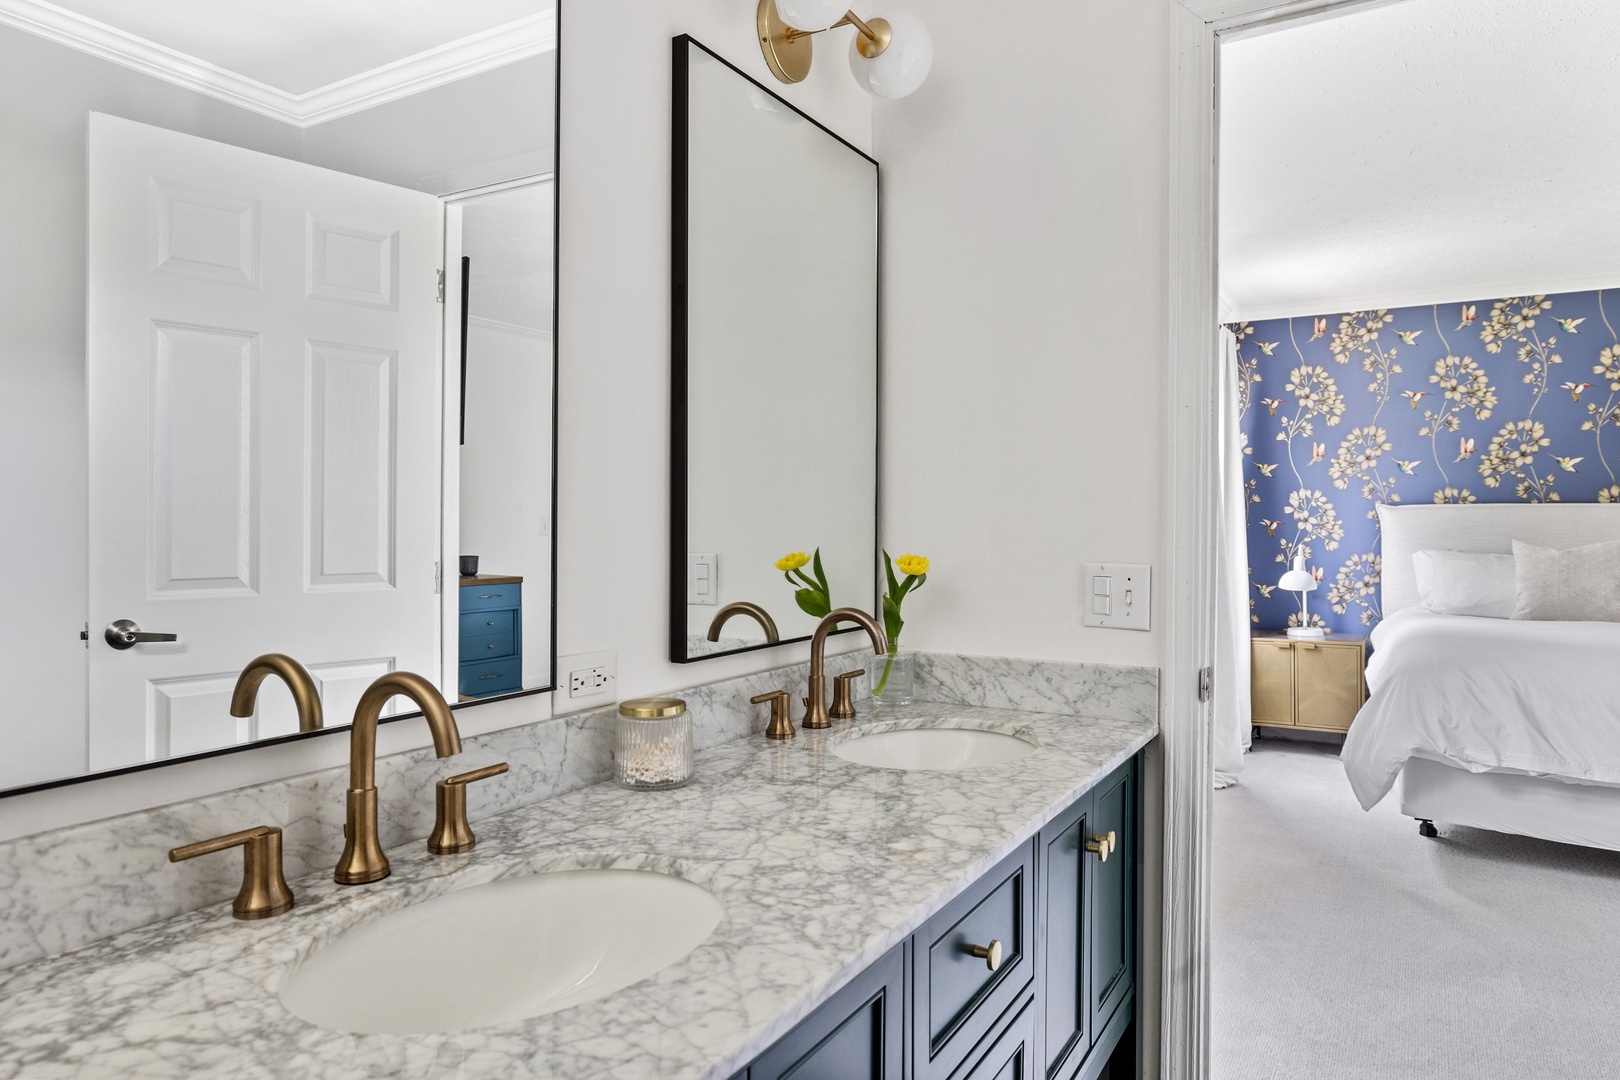 The en-suite bathroom offers a relaxing space to unwind after a day of vacation fun.